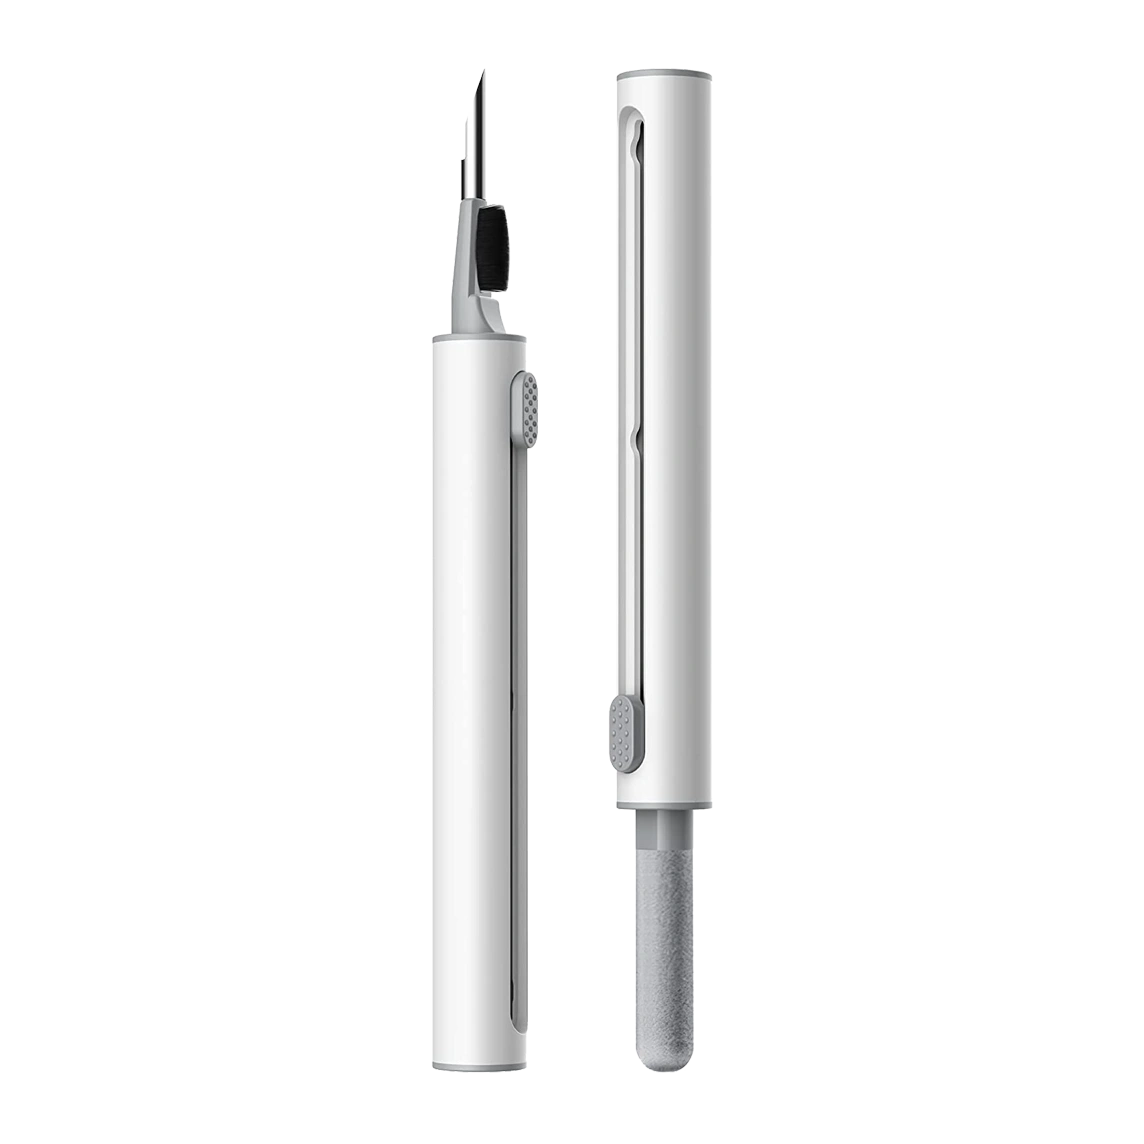 Airpods and iPhone Cleaning Kit Pen